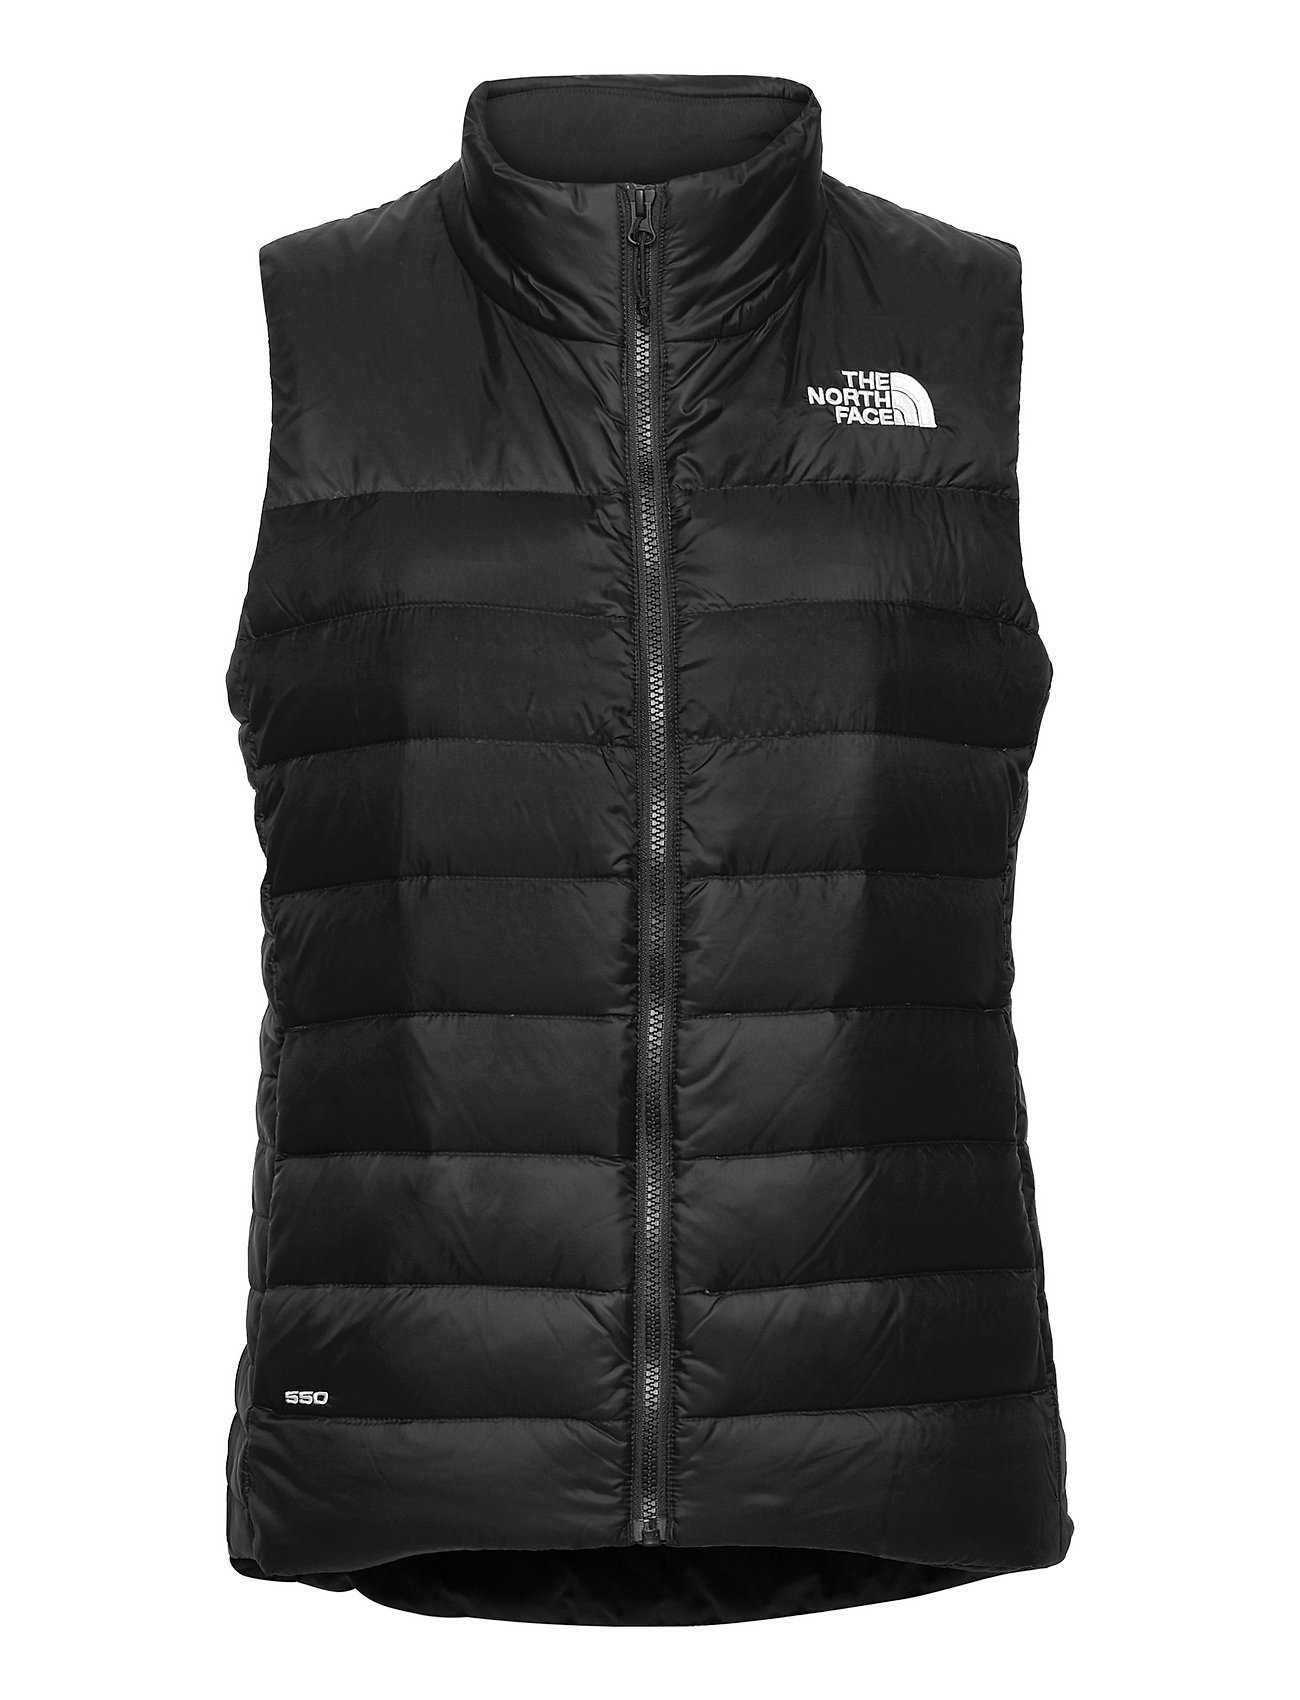 The North Face W Aconcagua Vest Jackets | lupon.gov.ph